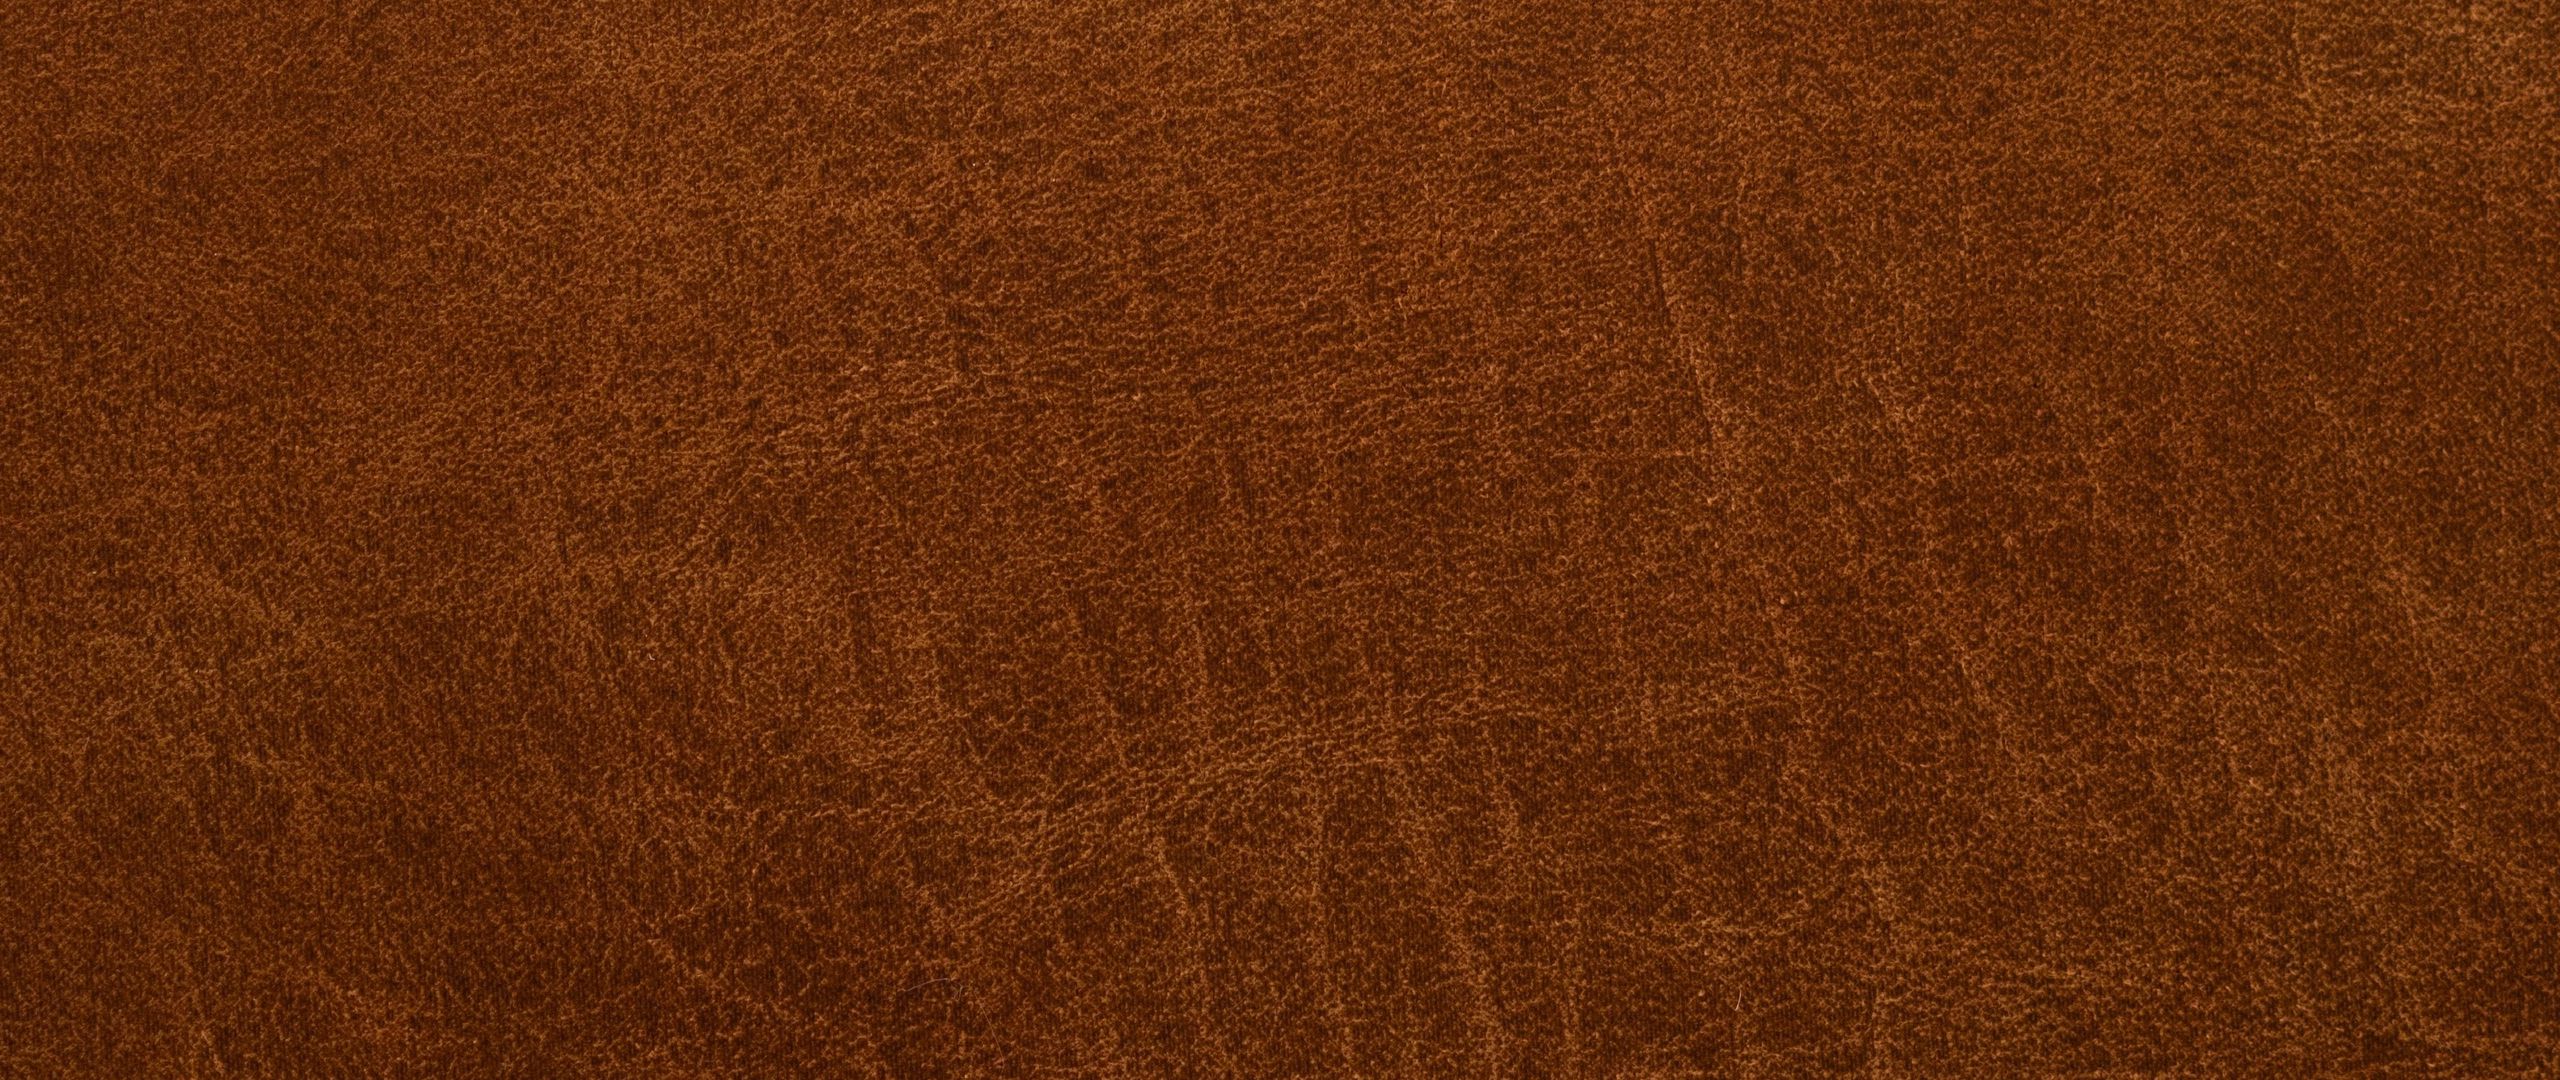 Download wallpaper 2560x1080 leather, brown, texture, surface dual wide  1080p hd background